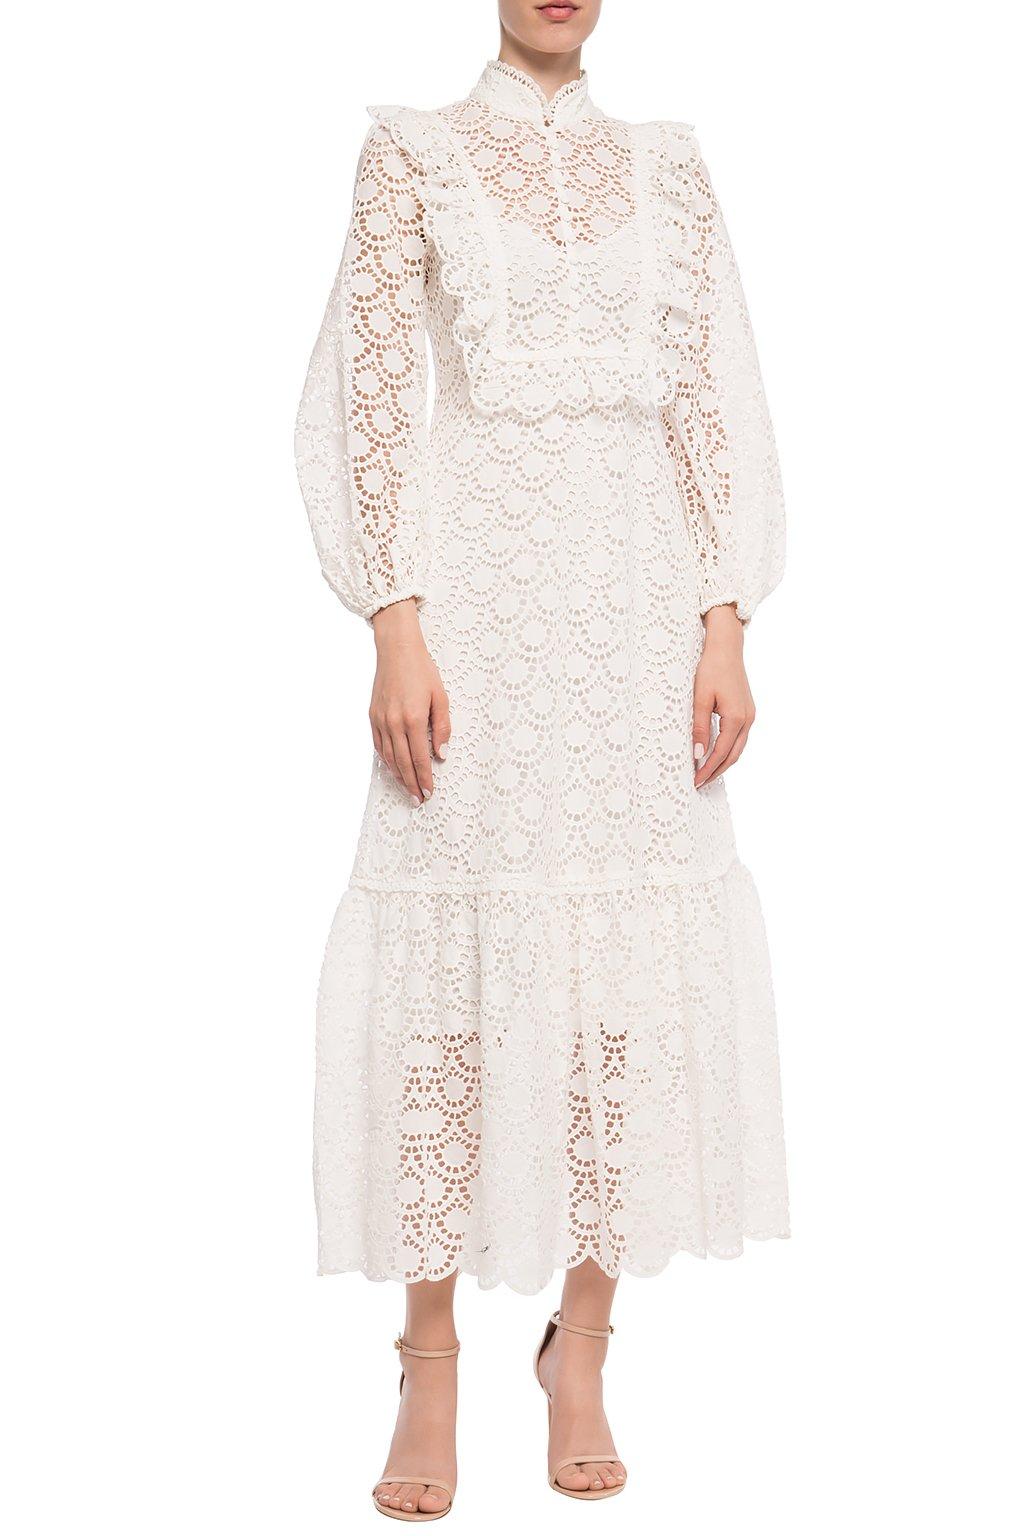 Zimmermann Lace Dress With Standing Collar in White - Lyst